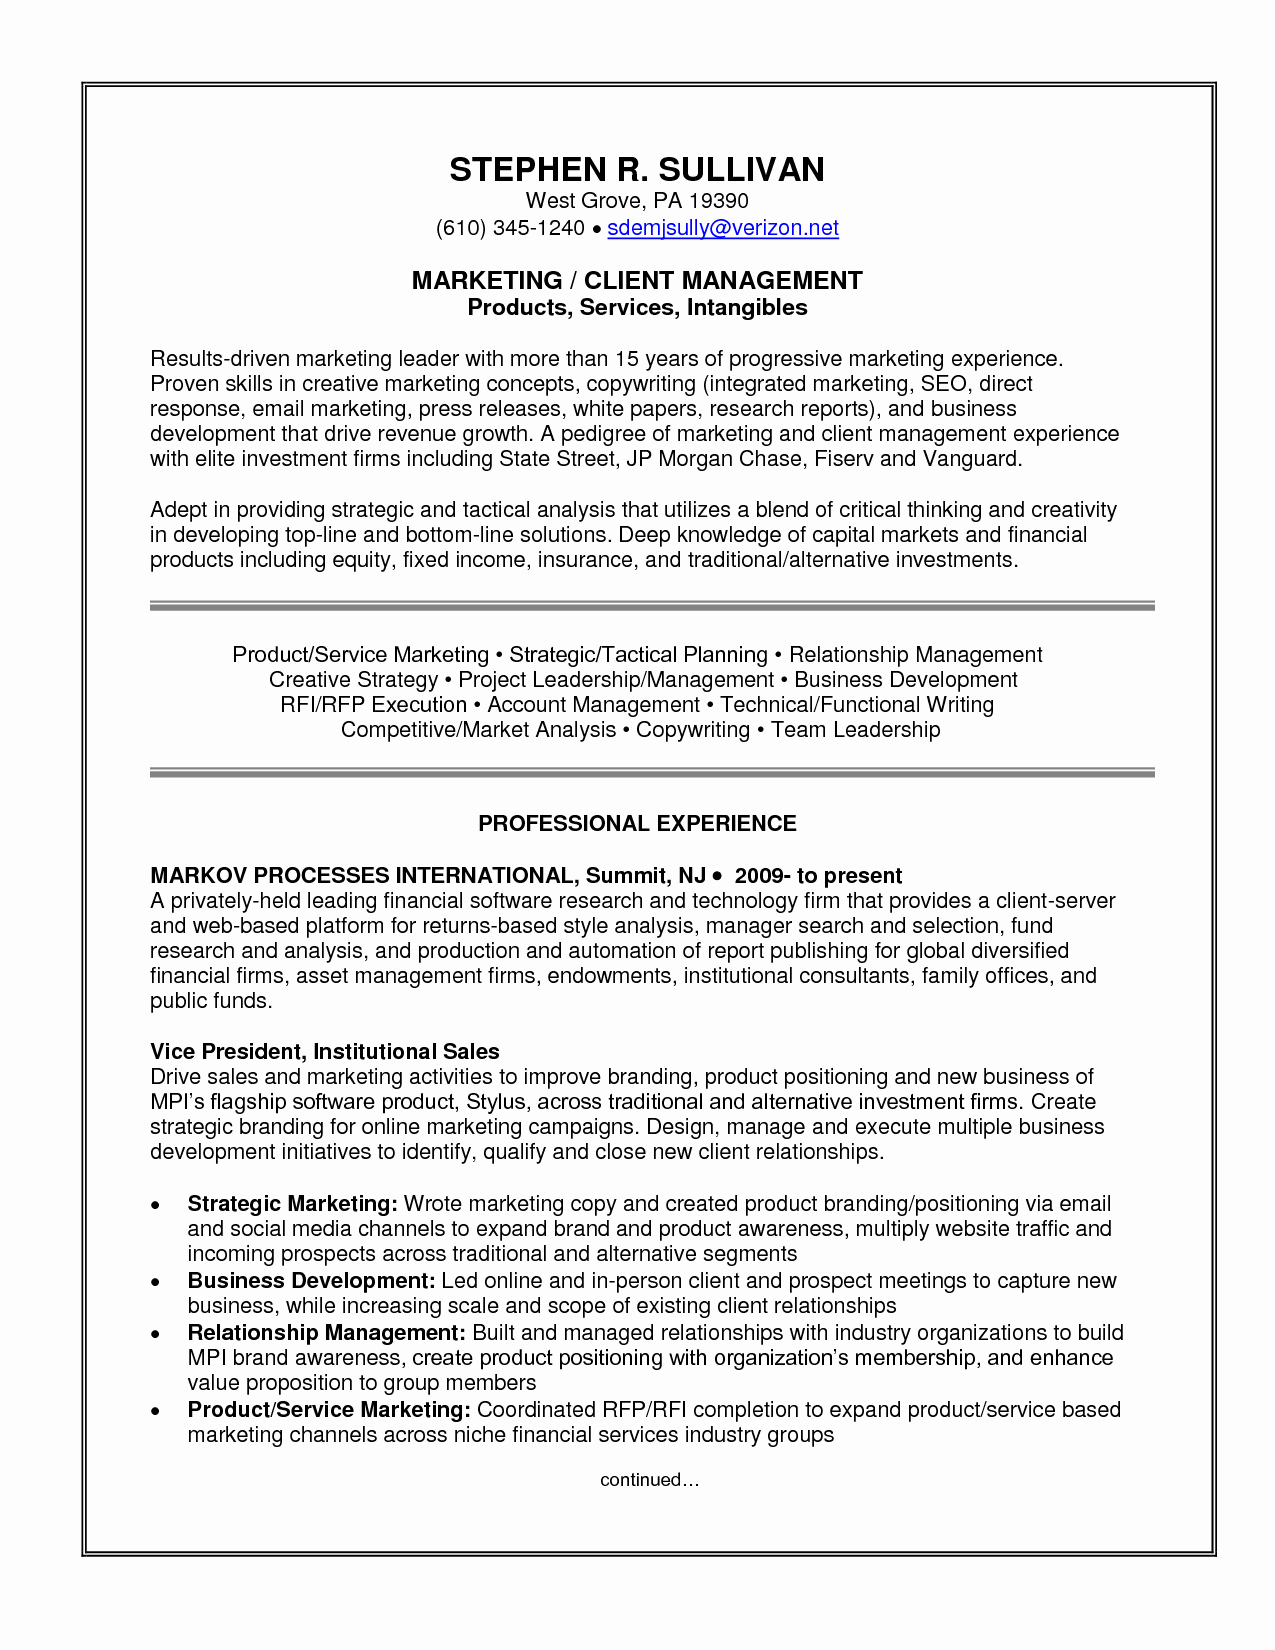 Accredited Investor Verification Letter Template - Professional Skills to Put A Resume Ideas